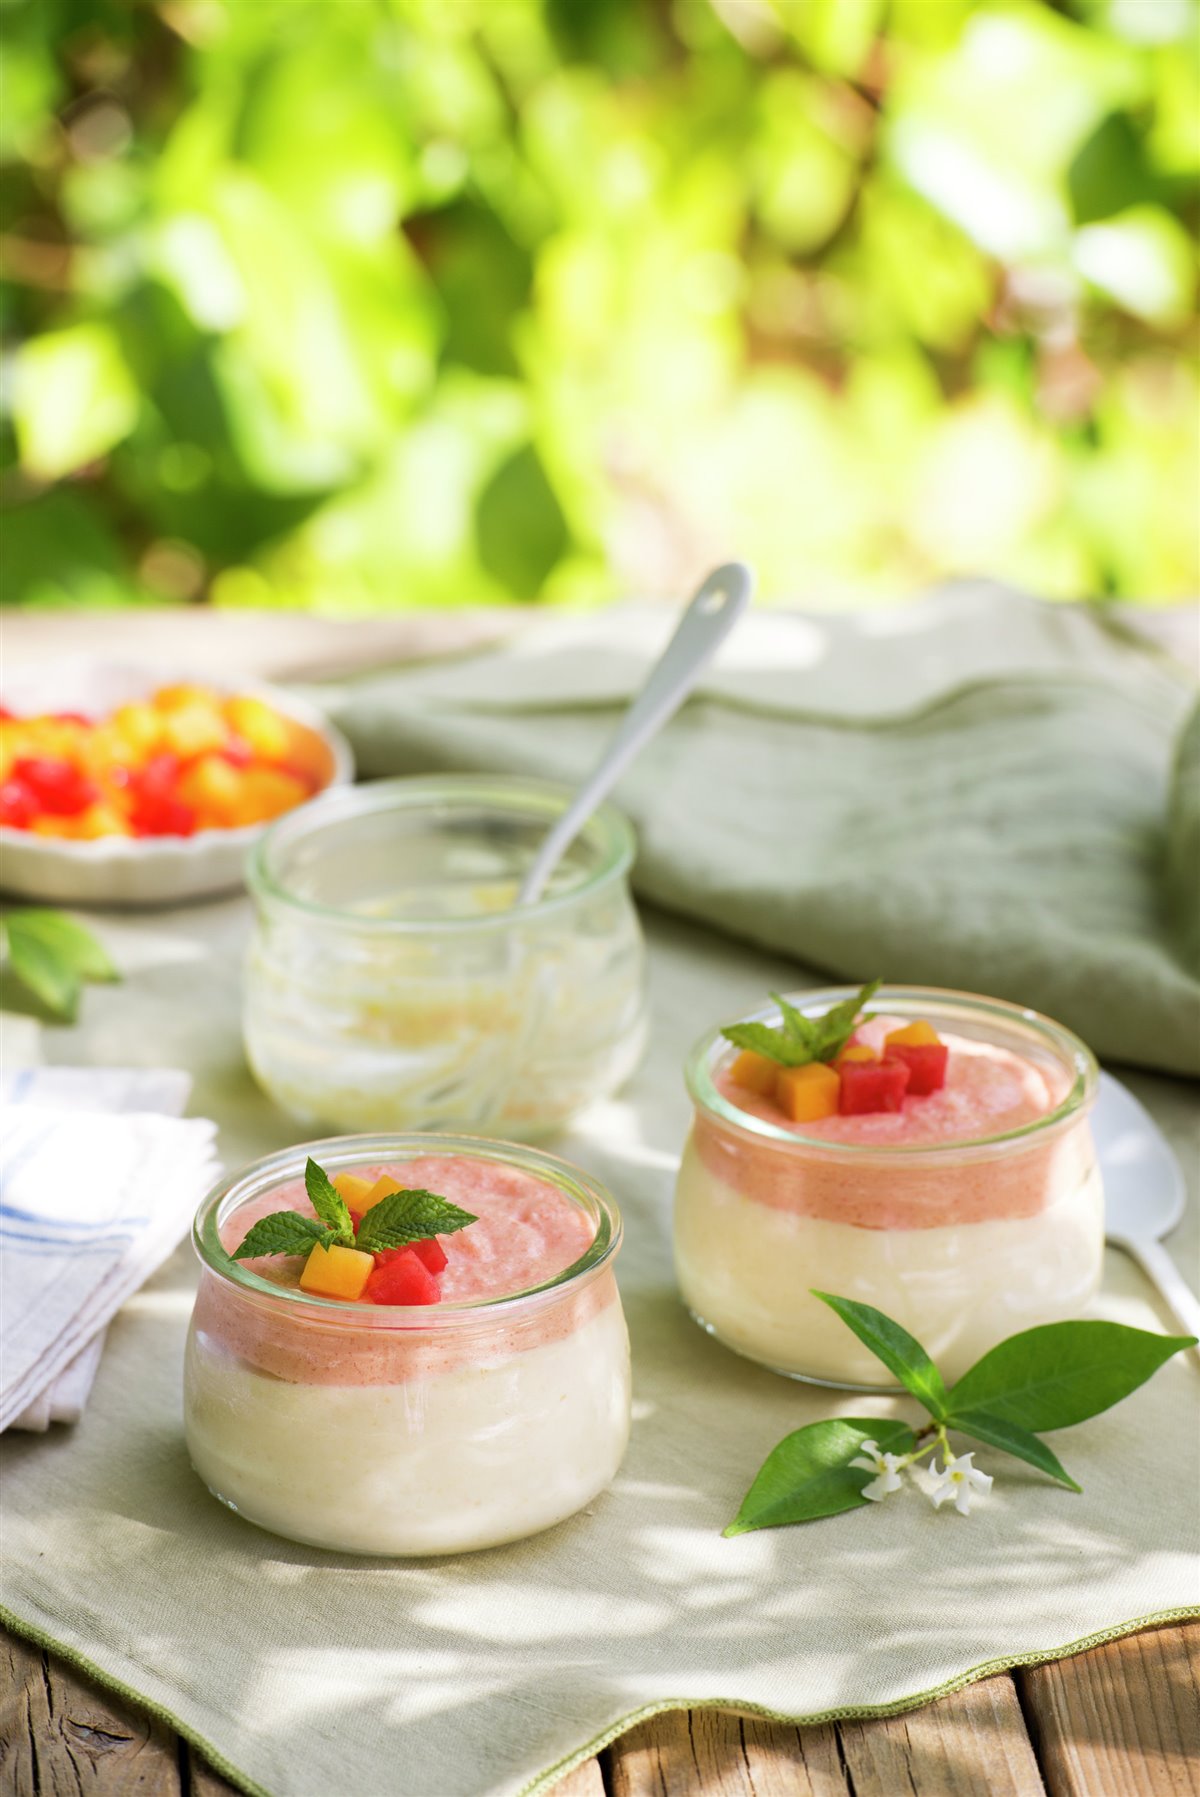 PEACH CREAM WITH WATERMELON MOUSSE